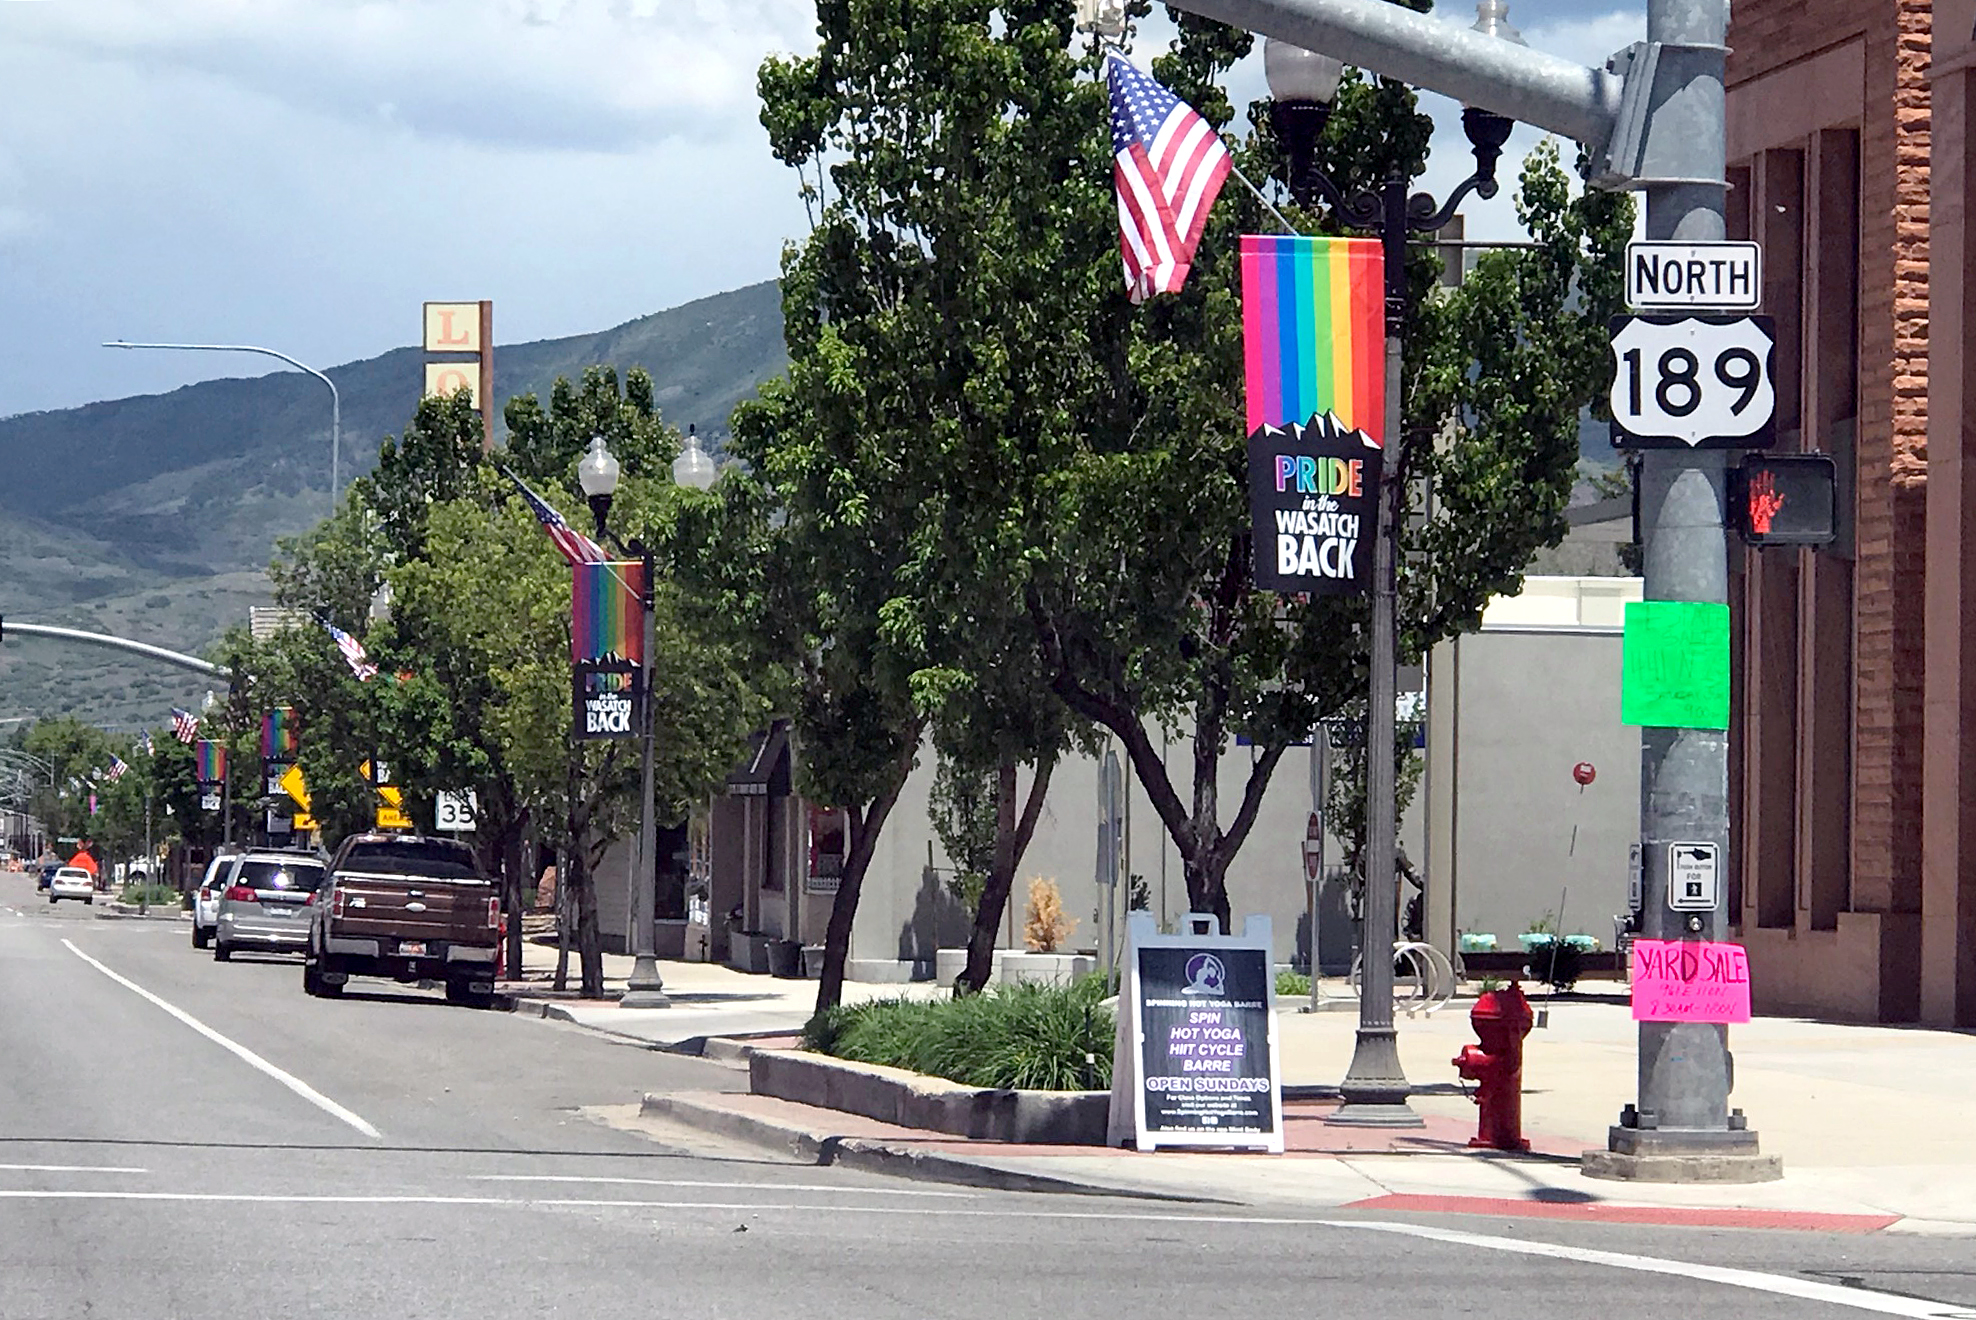 How the LGBT movement uses Pride flags to bully small communities